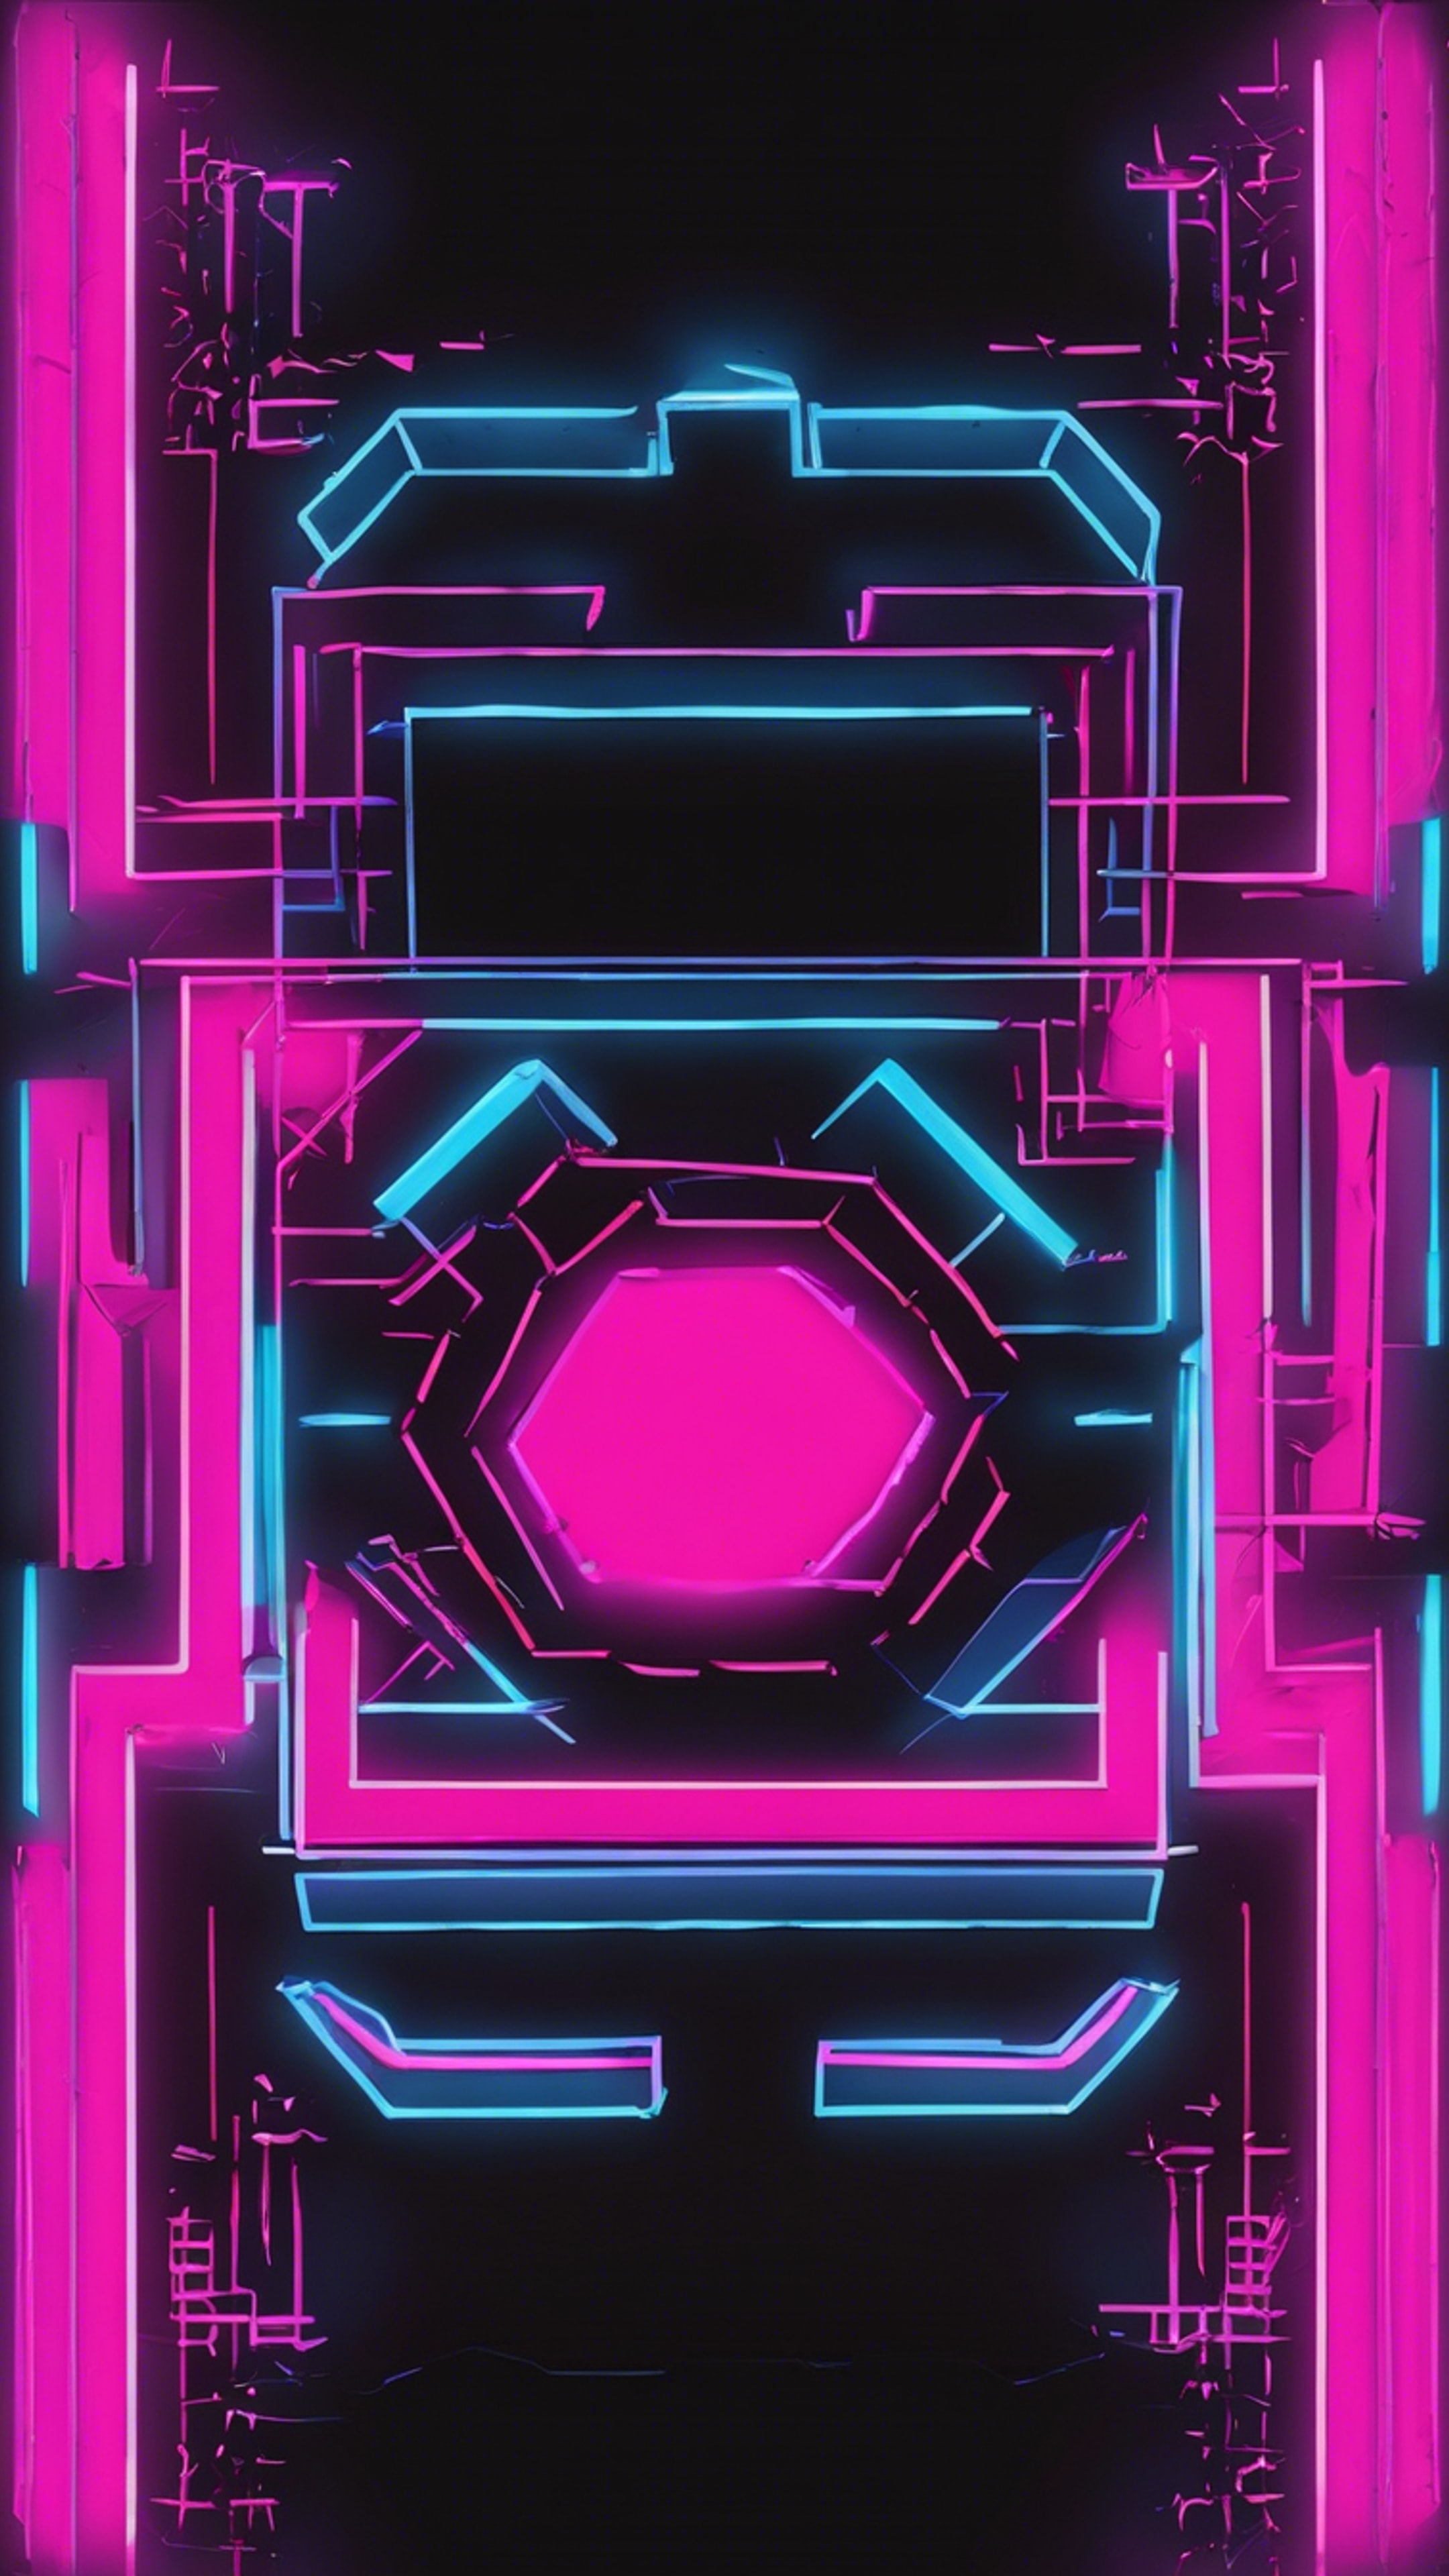 Bright neon pink and blue geometric shapes against a black background, reminiscent of 80s arcade games. Обои[dd42a0f55e3e425295c8]